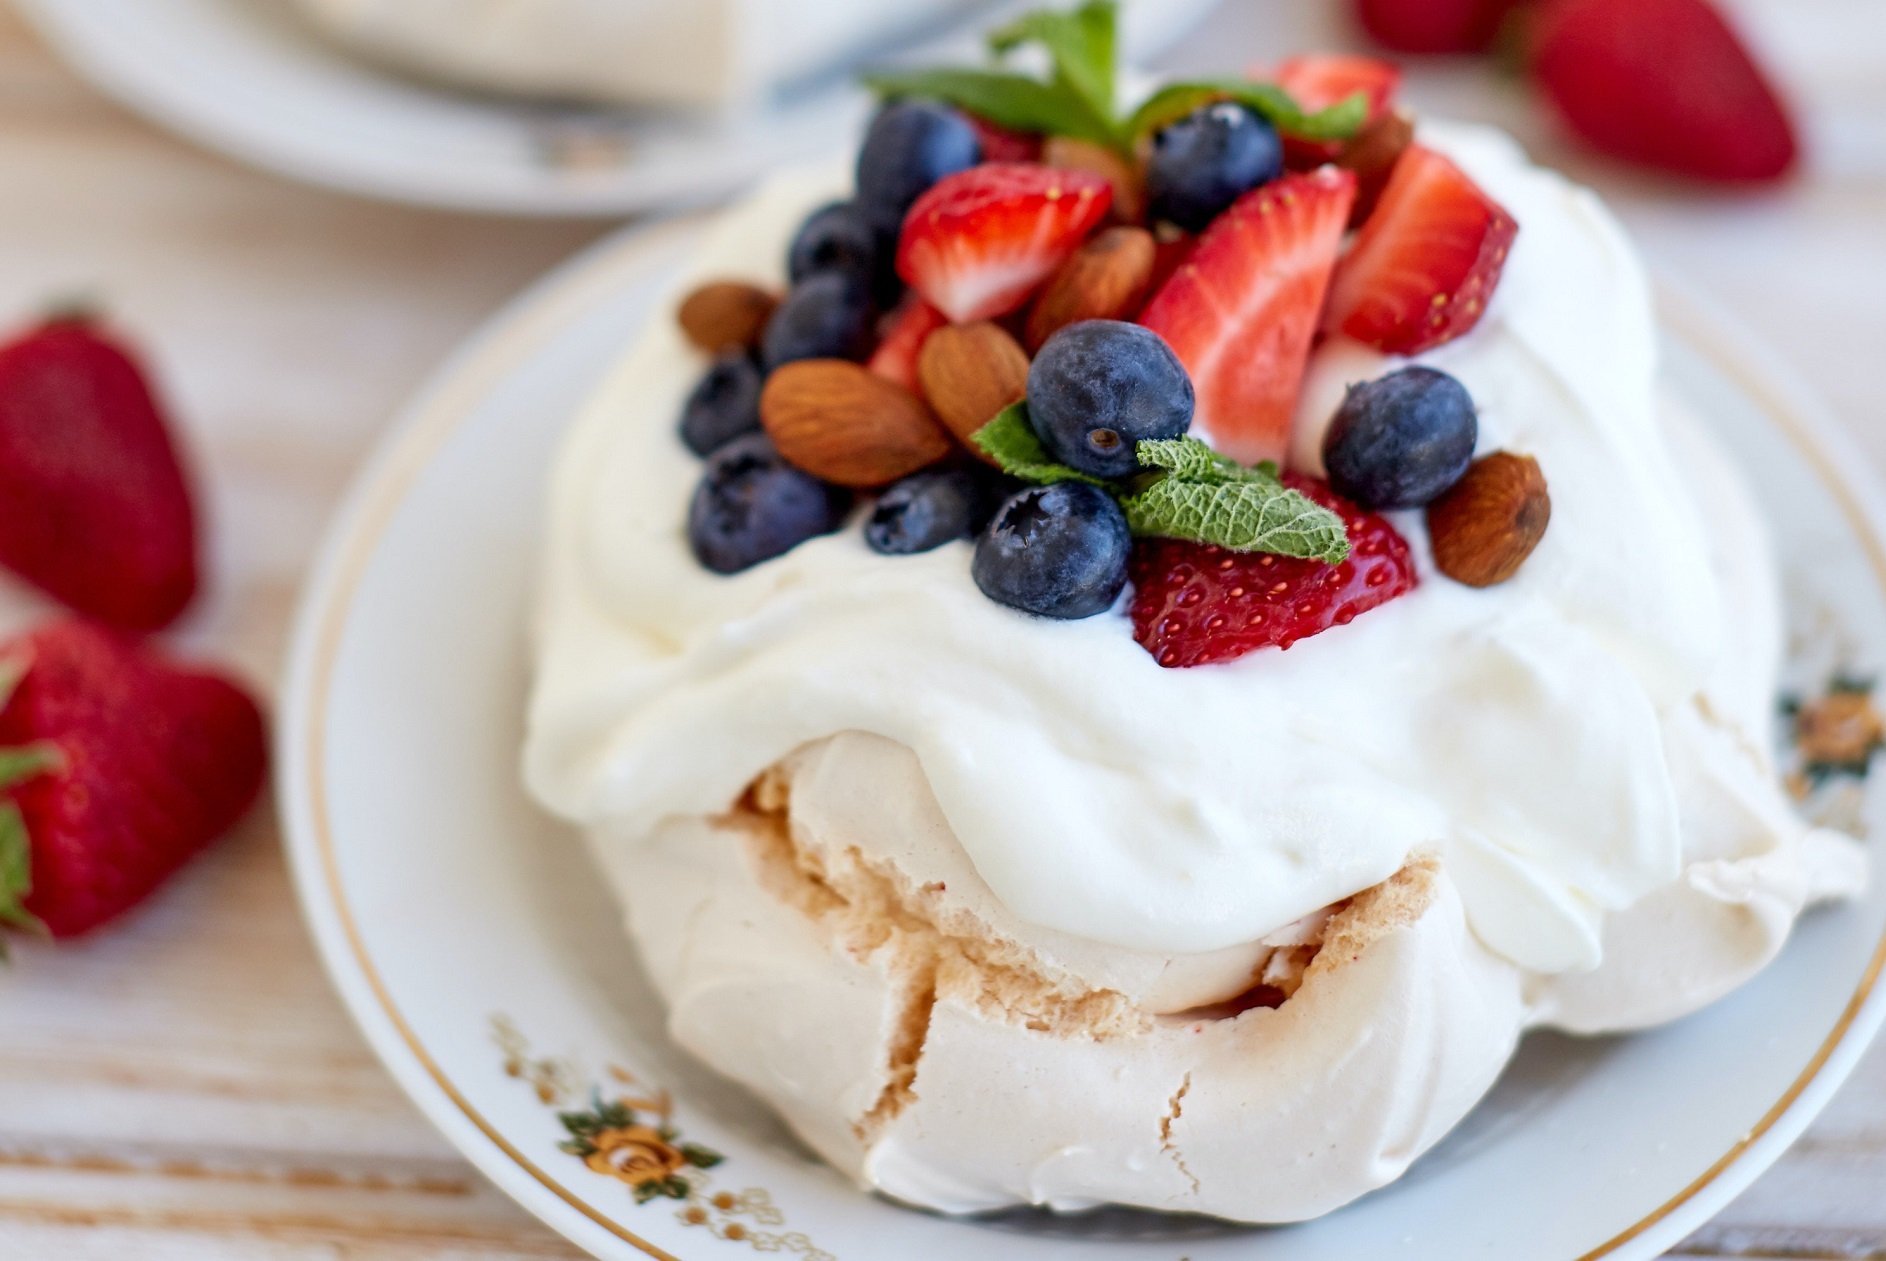 vegan pavlova topped with strawberries, almonds, blueberries and mint leaves